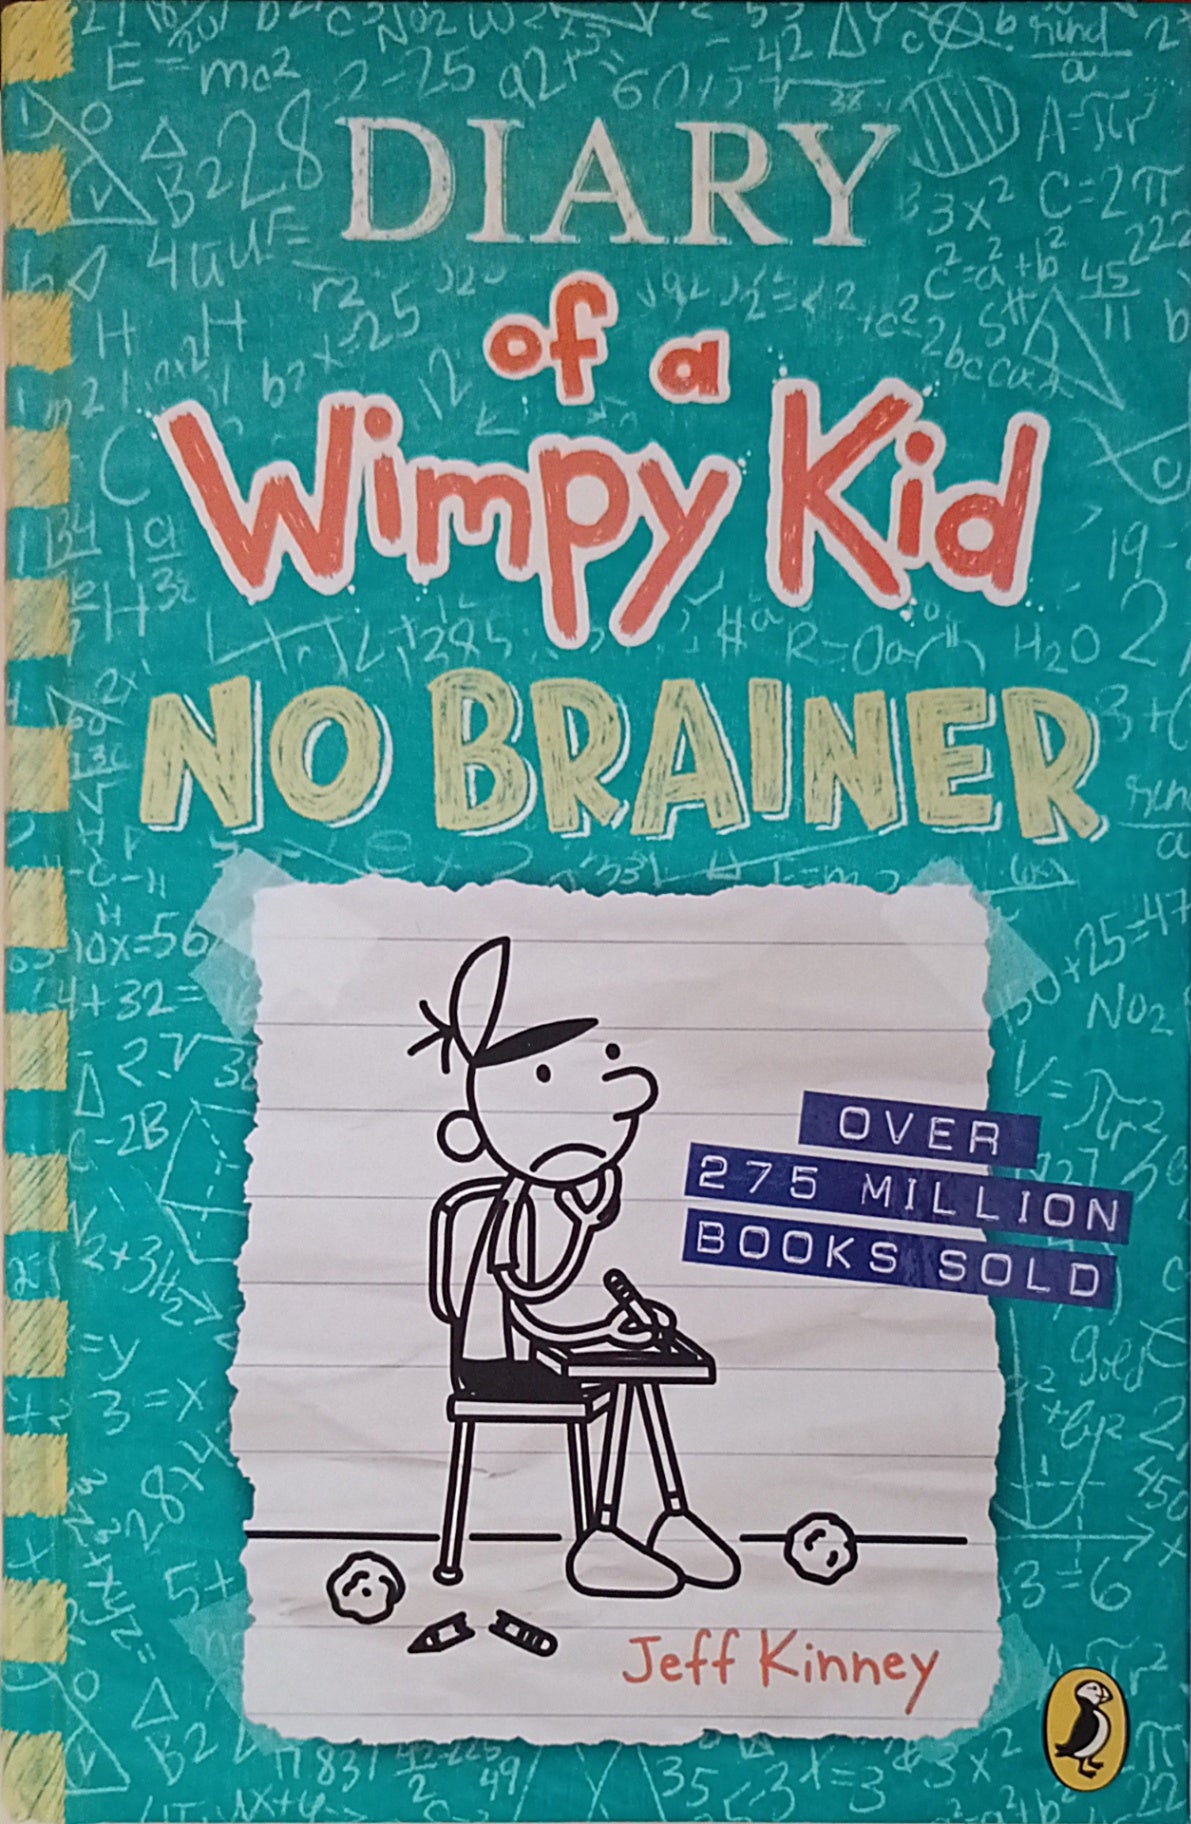 Diary of a Wimpy Kid No Brainer